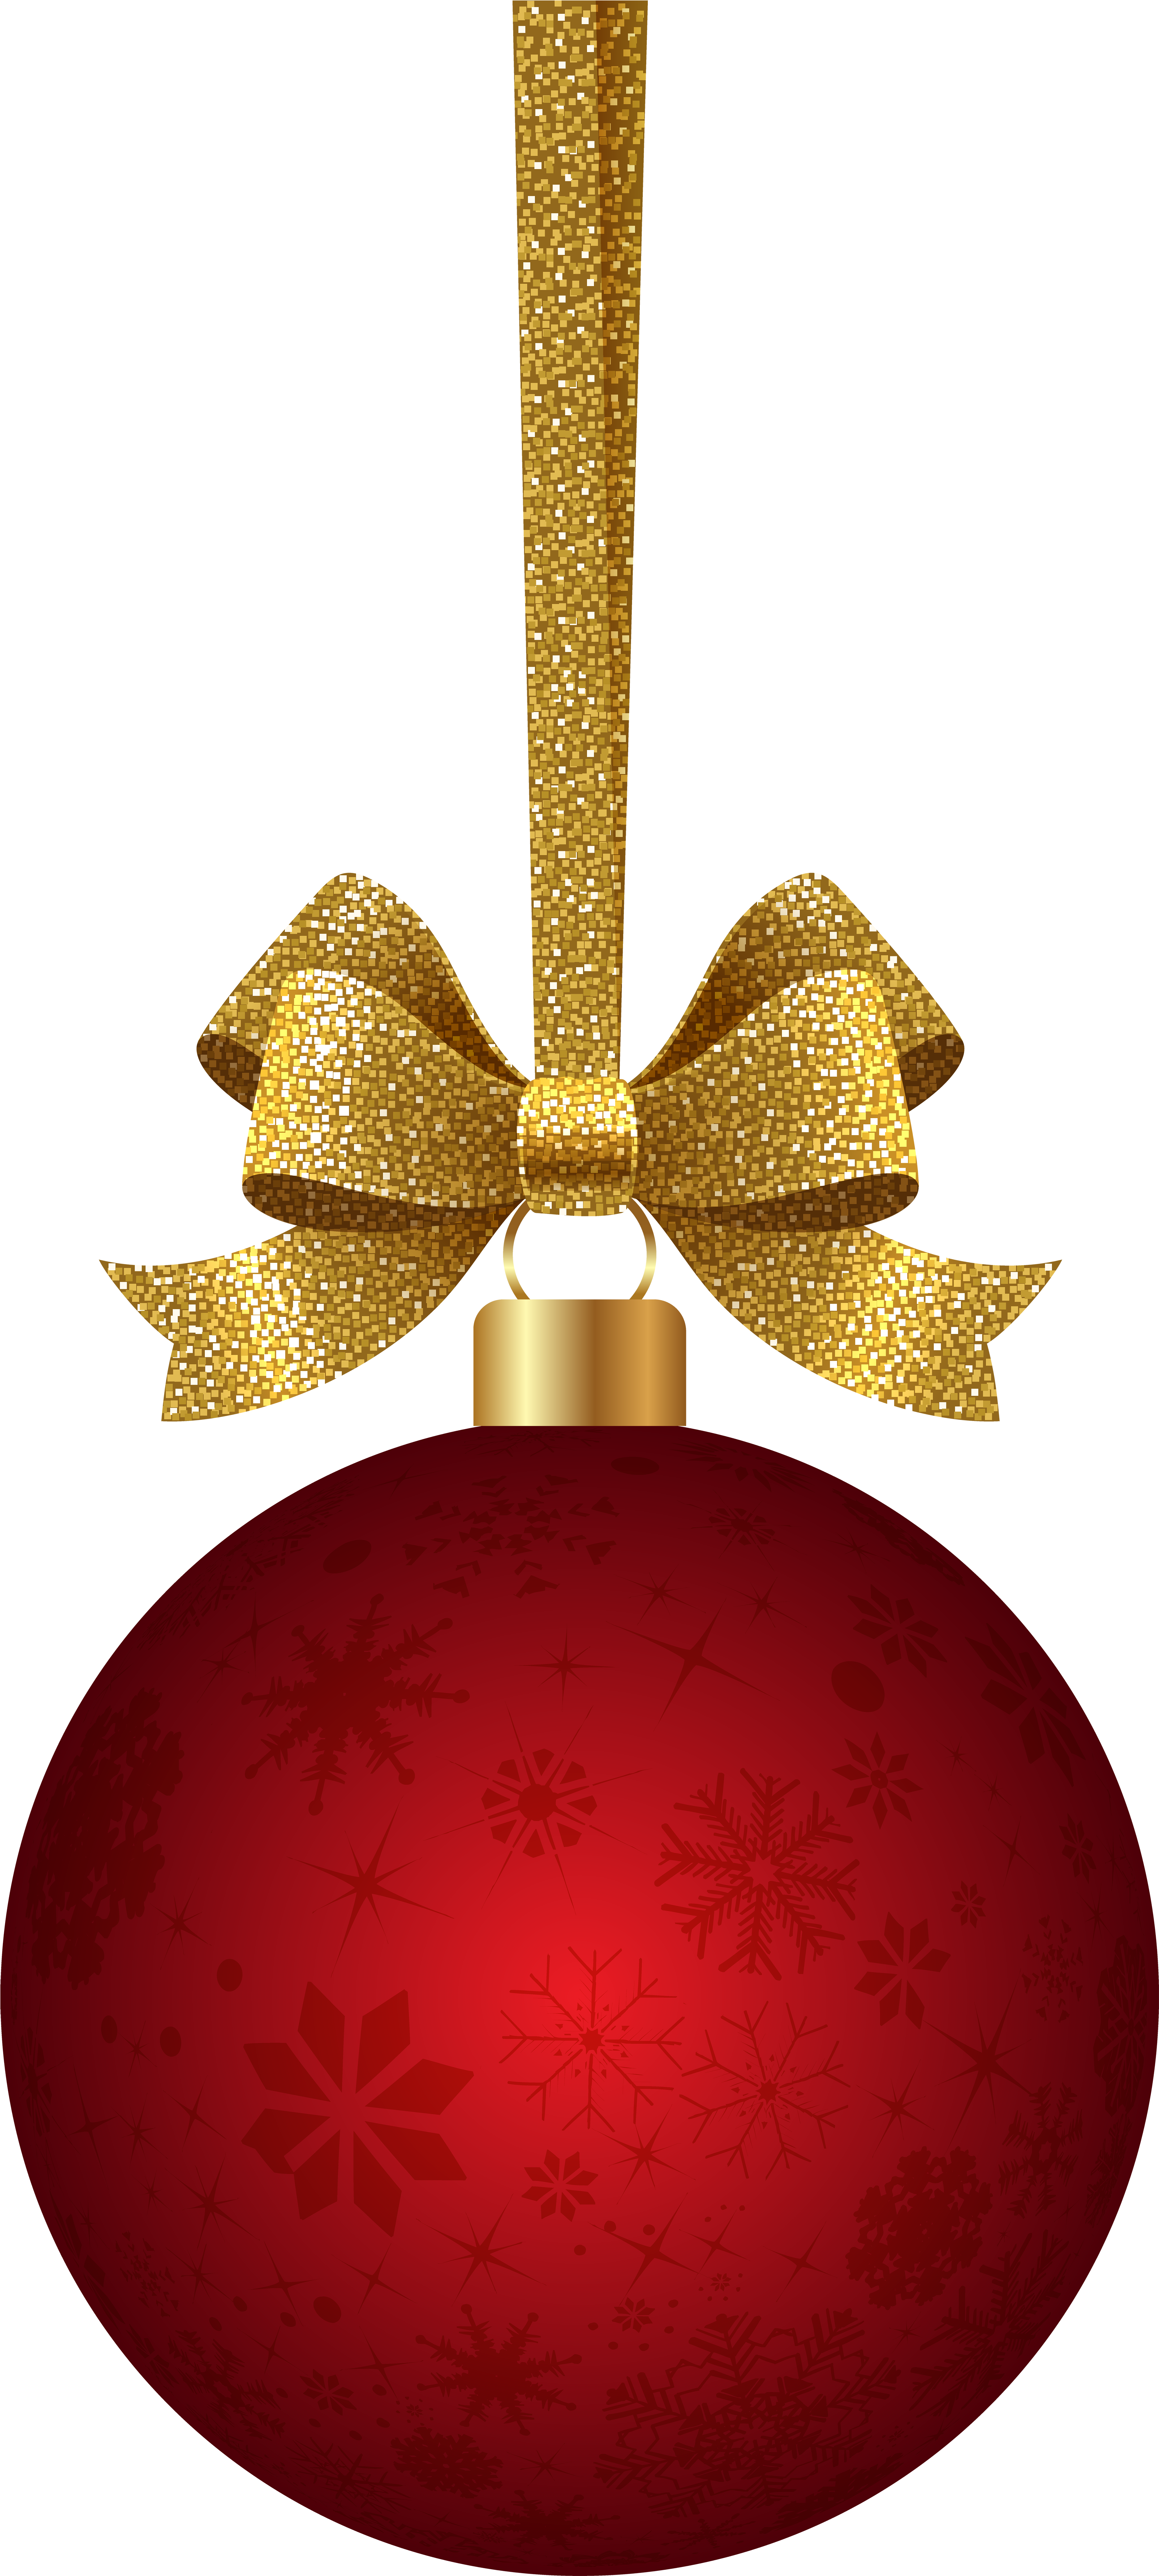 A Red And Gold Christmas Ornament With A Bow